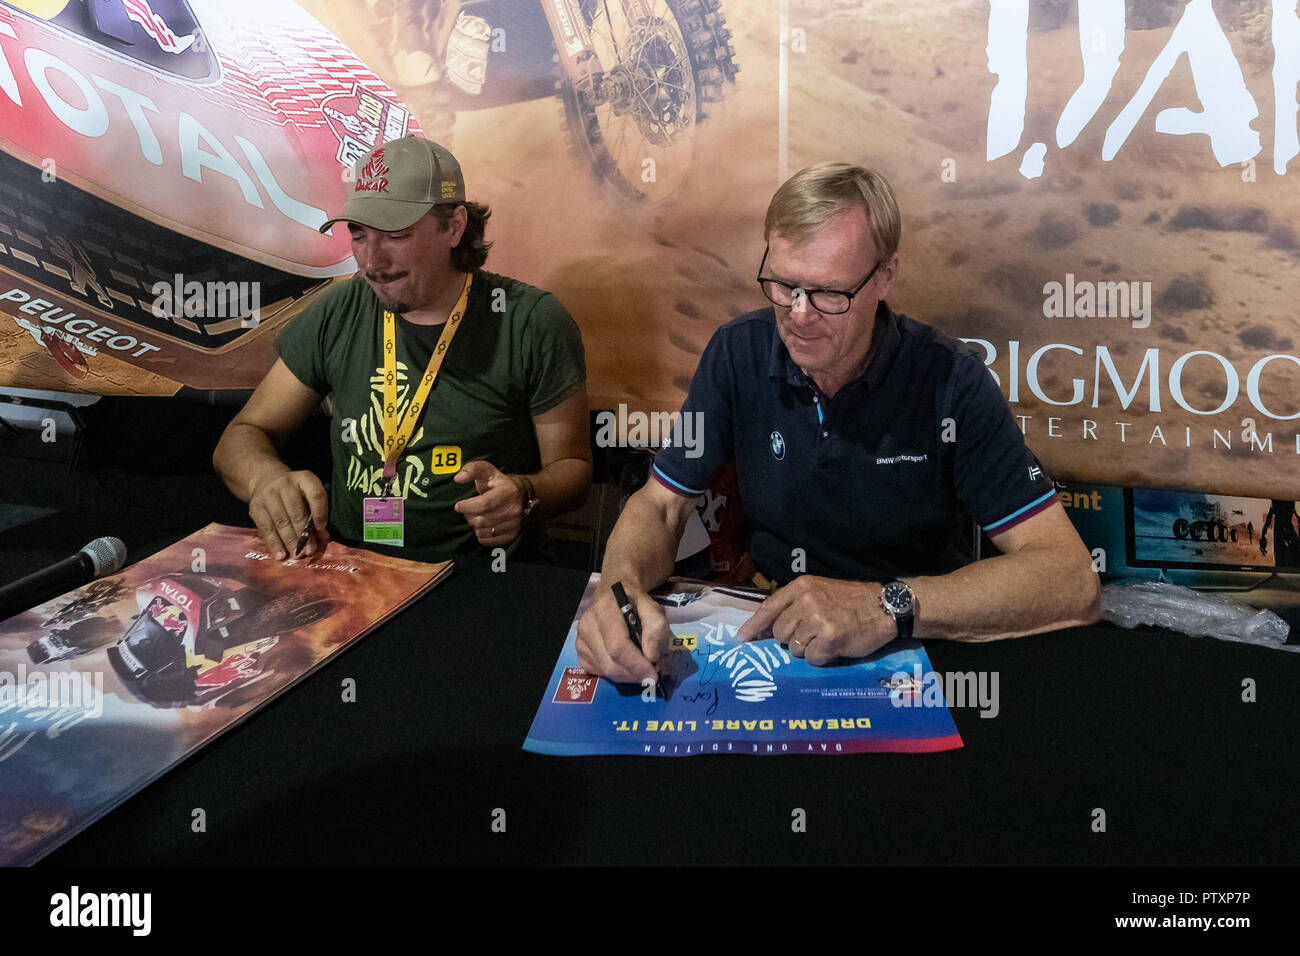 Alges, PORTUGAL: Ari Vatanen testing the portuguese game Dakar18 with Paulo Gomes CEO and Director of Bigmoon Entertainment on 4th and last day of Comic Con Portugal 2018 in Passeio Maritimo de Alges in Alges, Sunday, Sep. 9, 2018. Due to be released on Sep. 11 on PlayStation 4, Xbox One, Microsoft Windows  Featuring: Ari Vatanen, Paulo Gomes Where: Algés, Oeiras, Portugal When: 09 Sep 2018 Credit: Rui M Leal/WENN.com Stock Photo